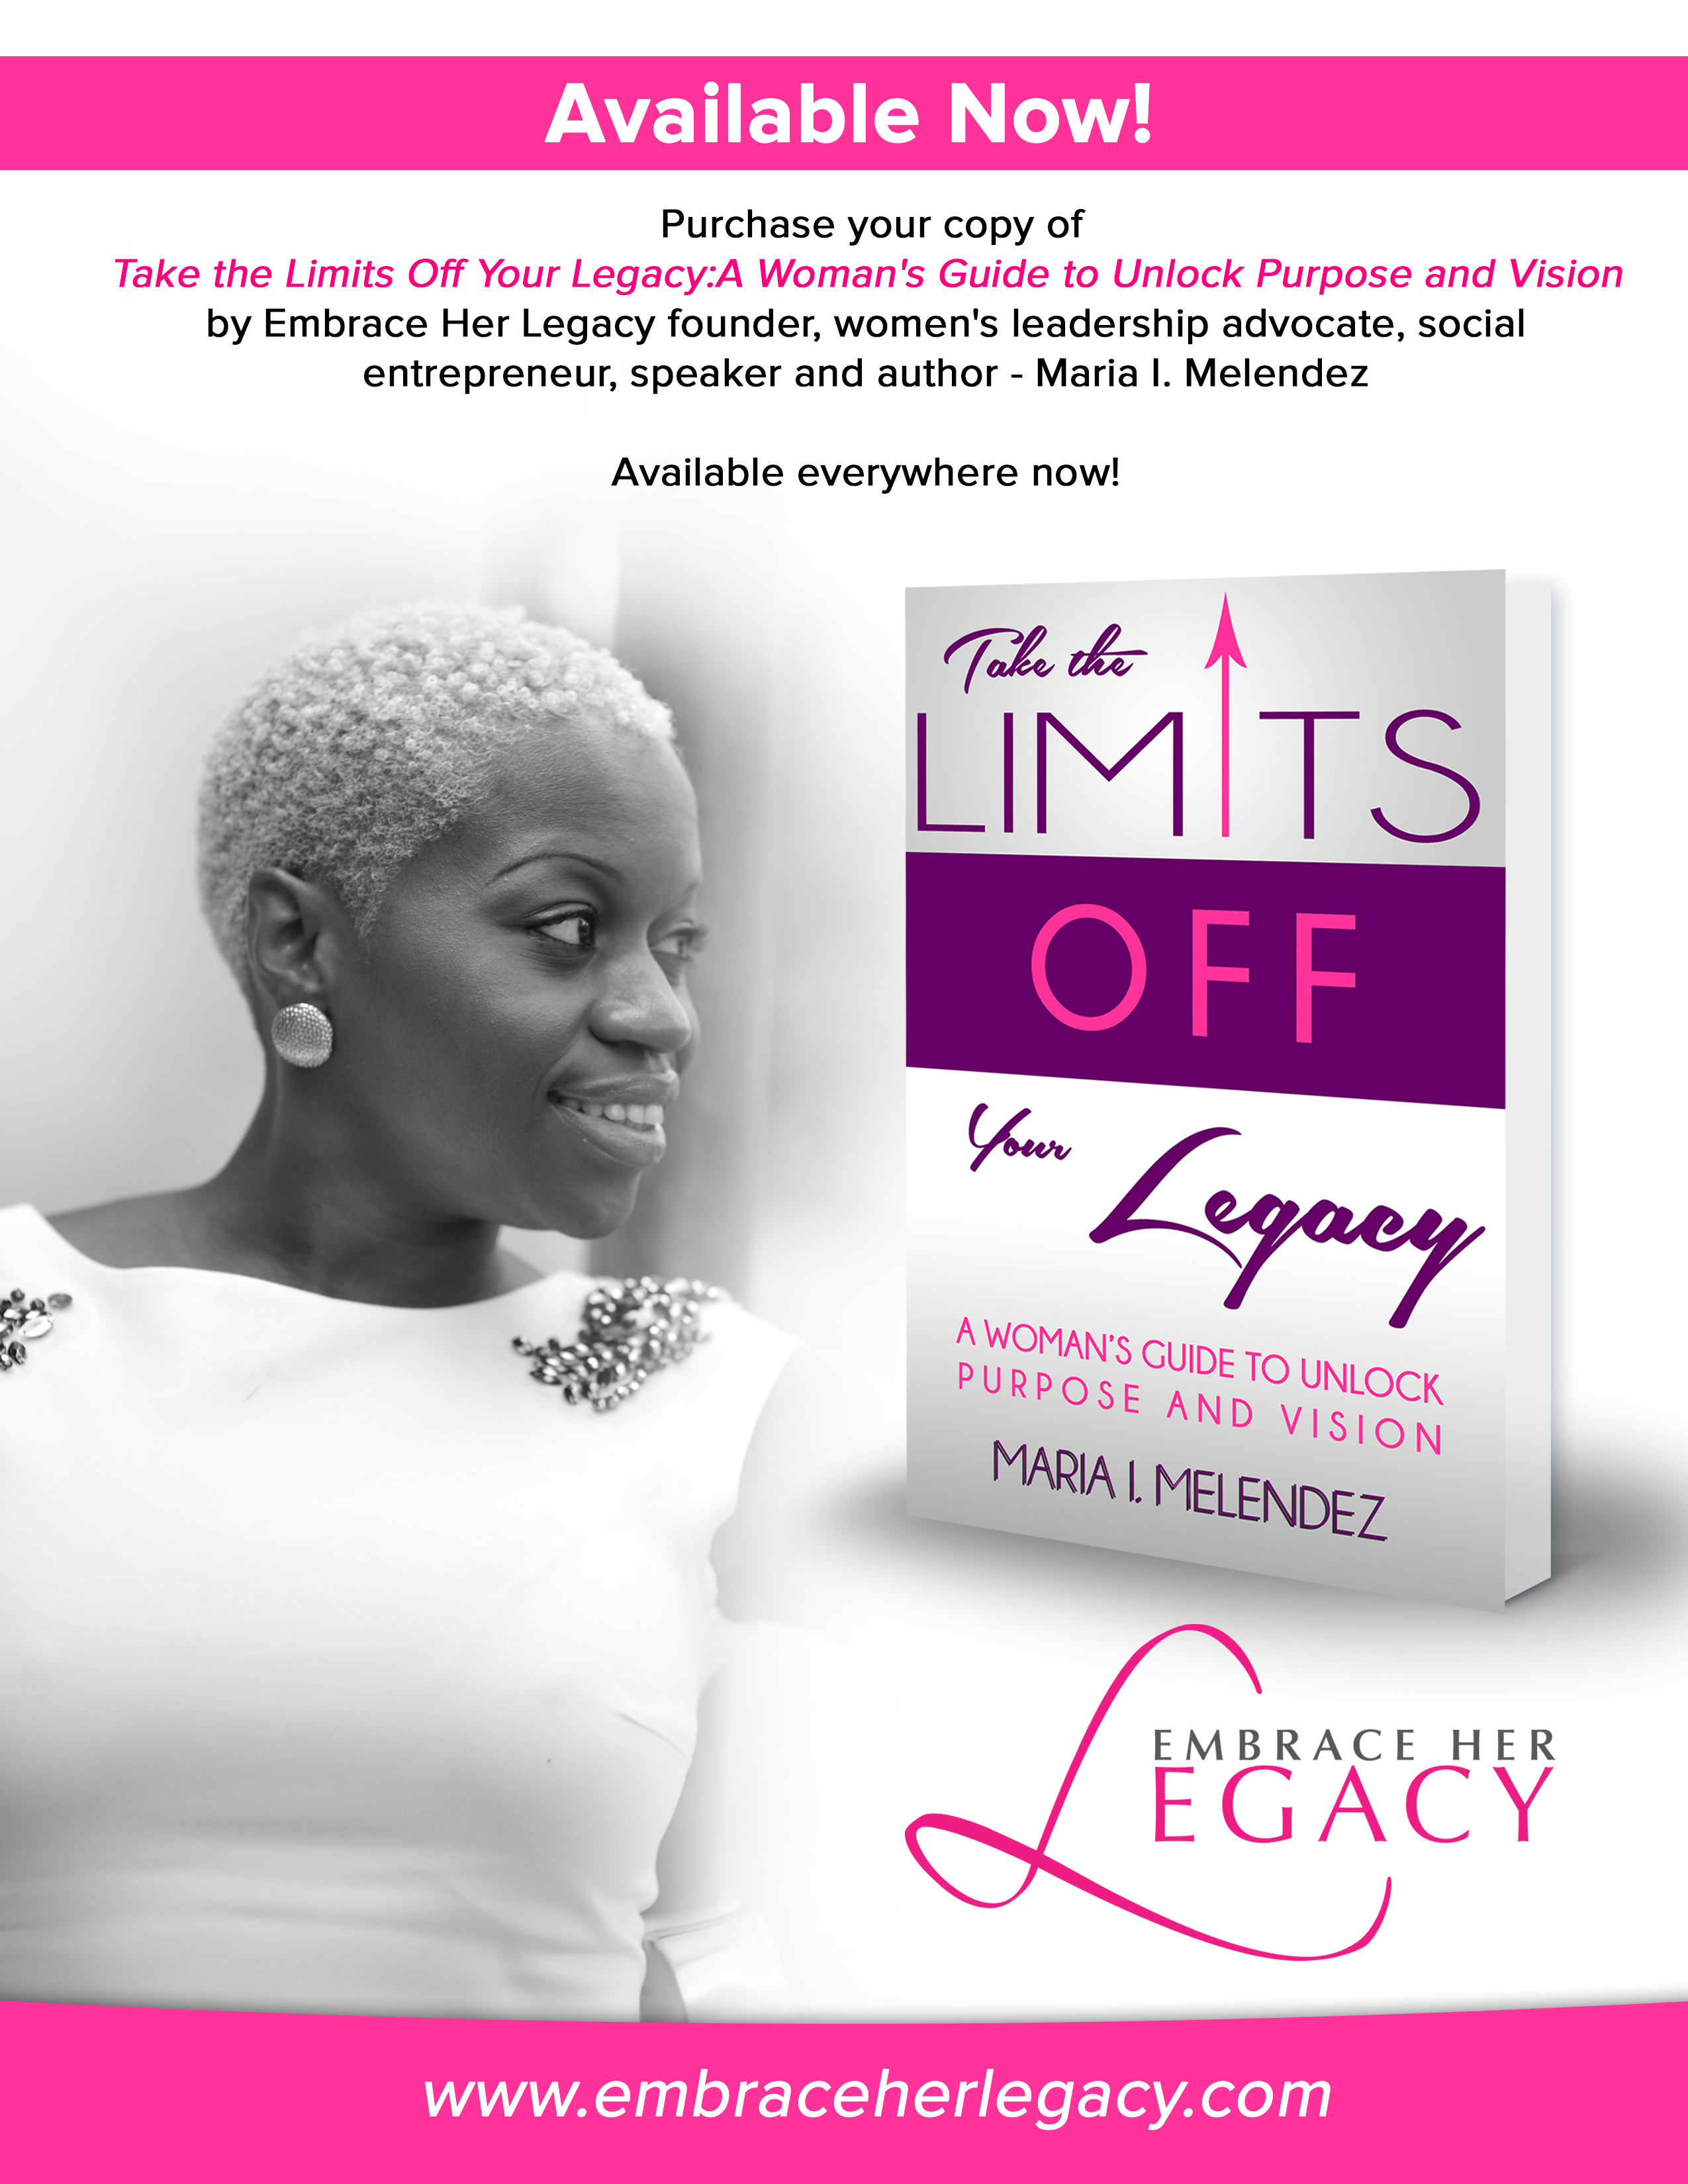 Take The Limits Off Your Legacy – Available Now!